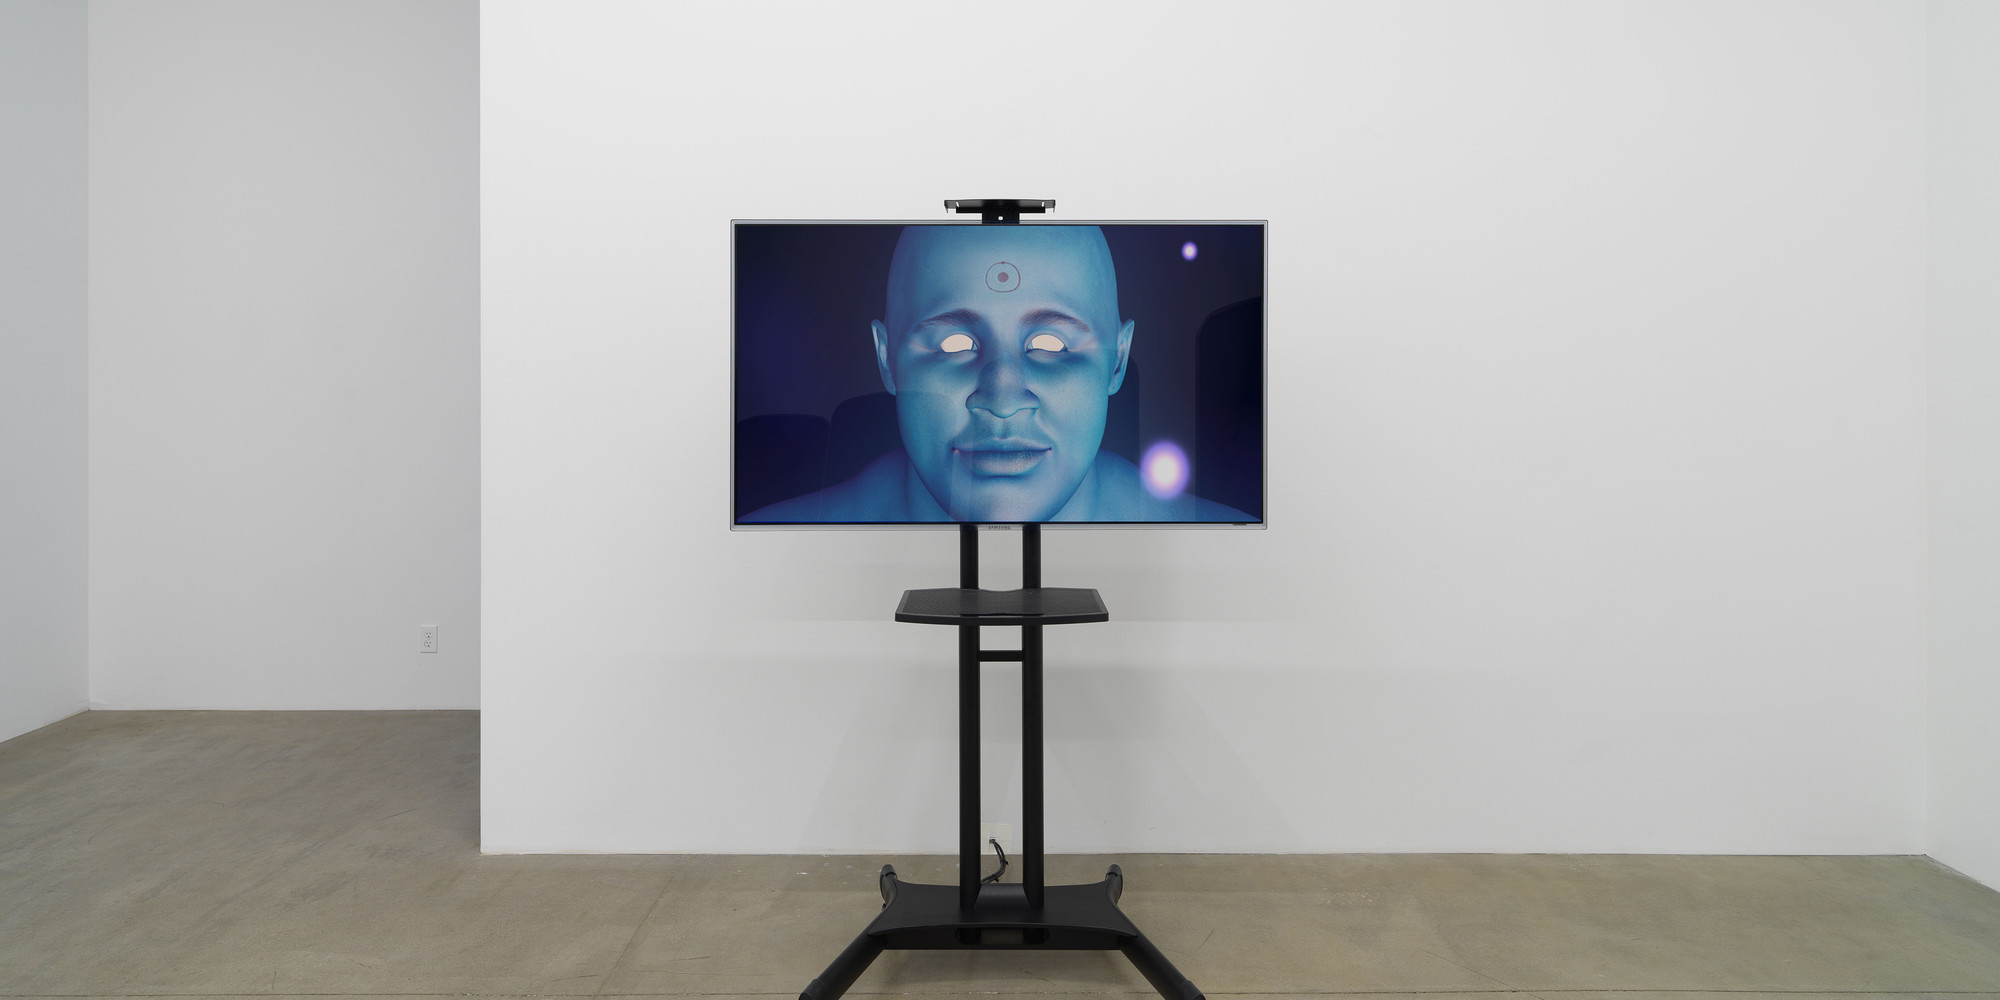 American Artist. I’m Blue (If I Was █████ I Would Die). 2019. The Museum of Modern Art, New York. Fund for the Twenty-First Century. © 2022 American Artist. Installation view, Koenig &amp; Clinton, New York, 2019